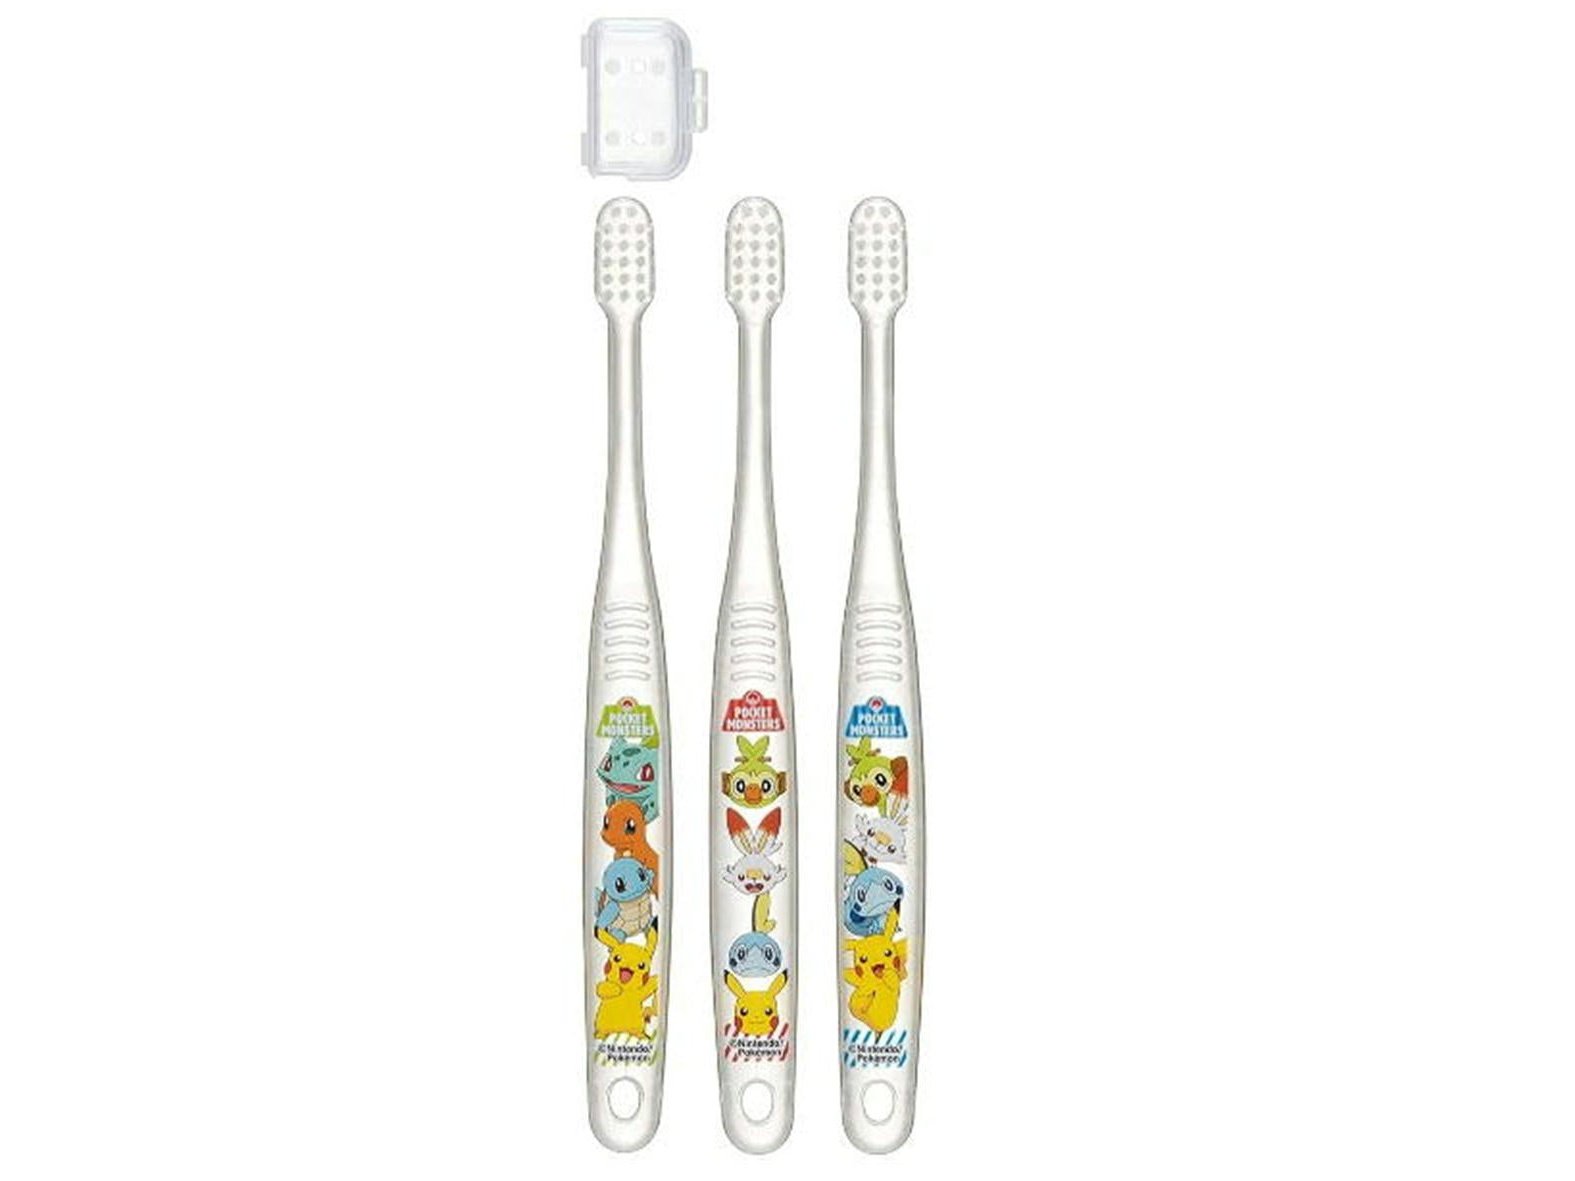 Skater Pokemon Clear Toothbrush Soft 3-5 years 3P